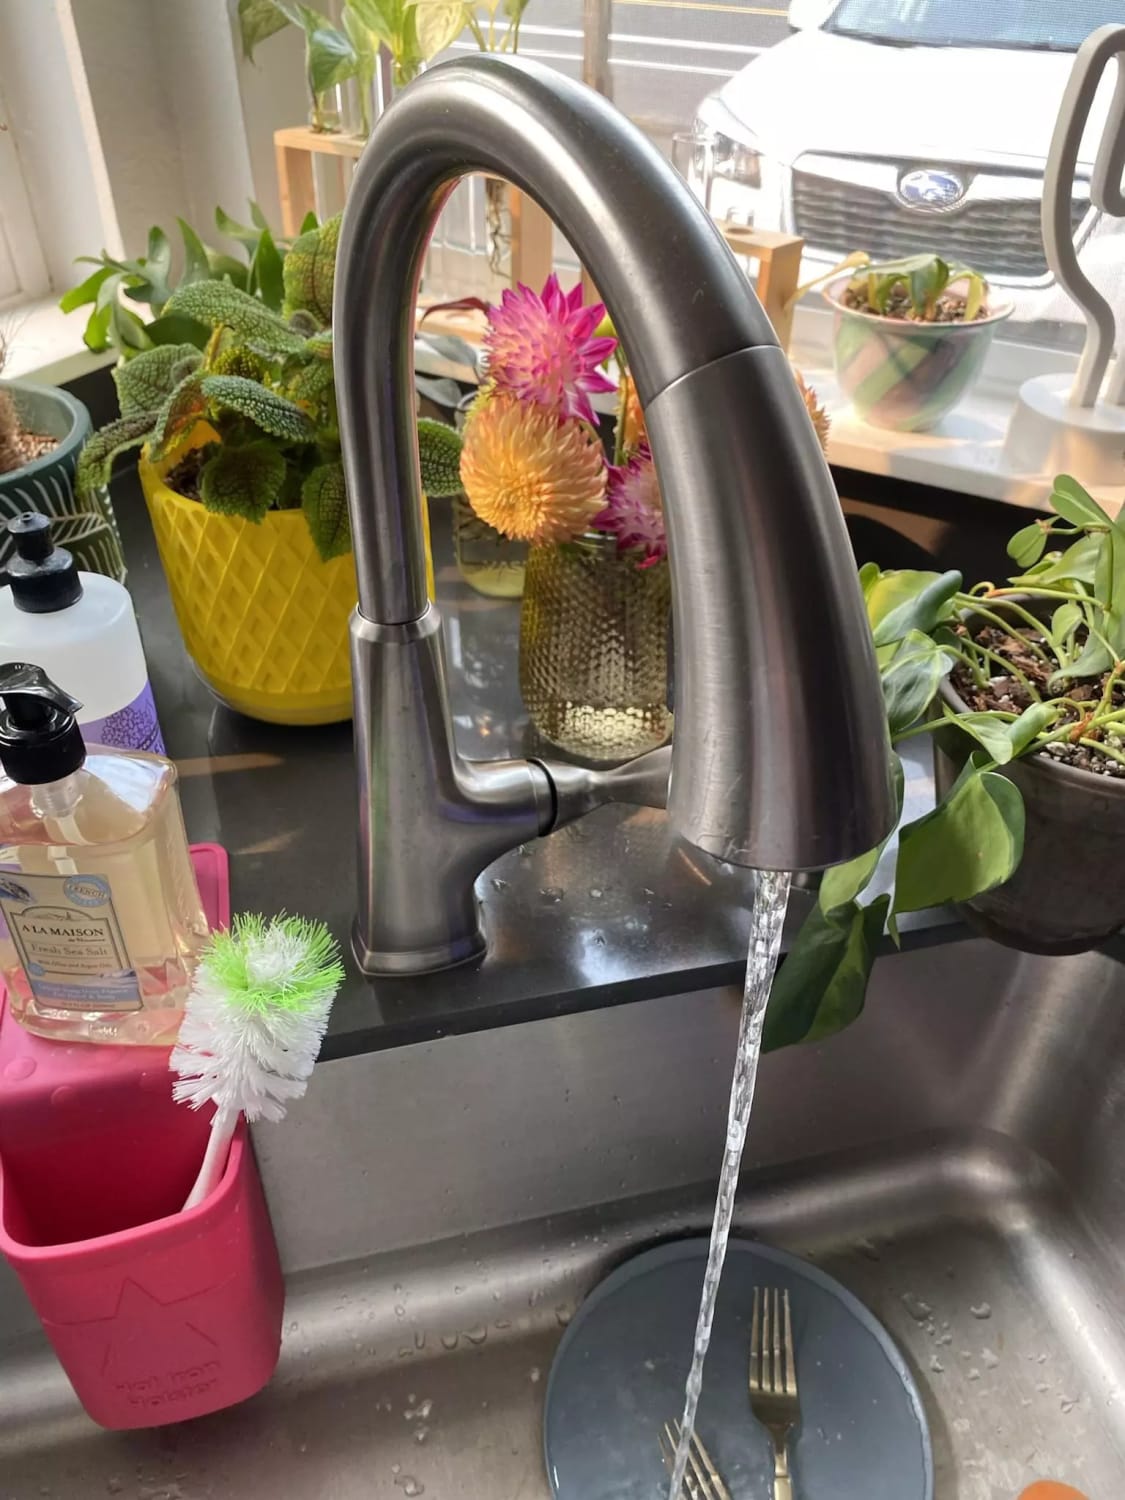 Kitchen faucet has low pressure, but I’m not sure how to diagnose the cause.